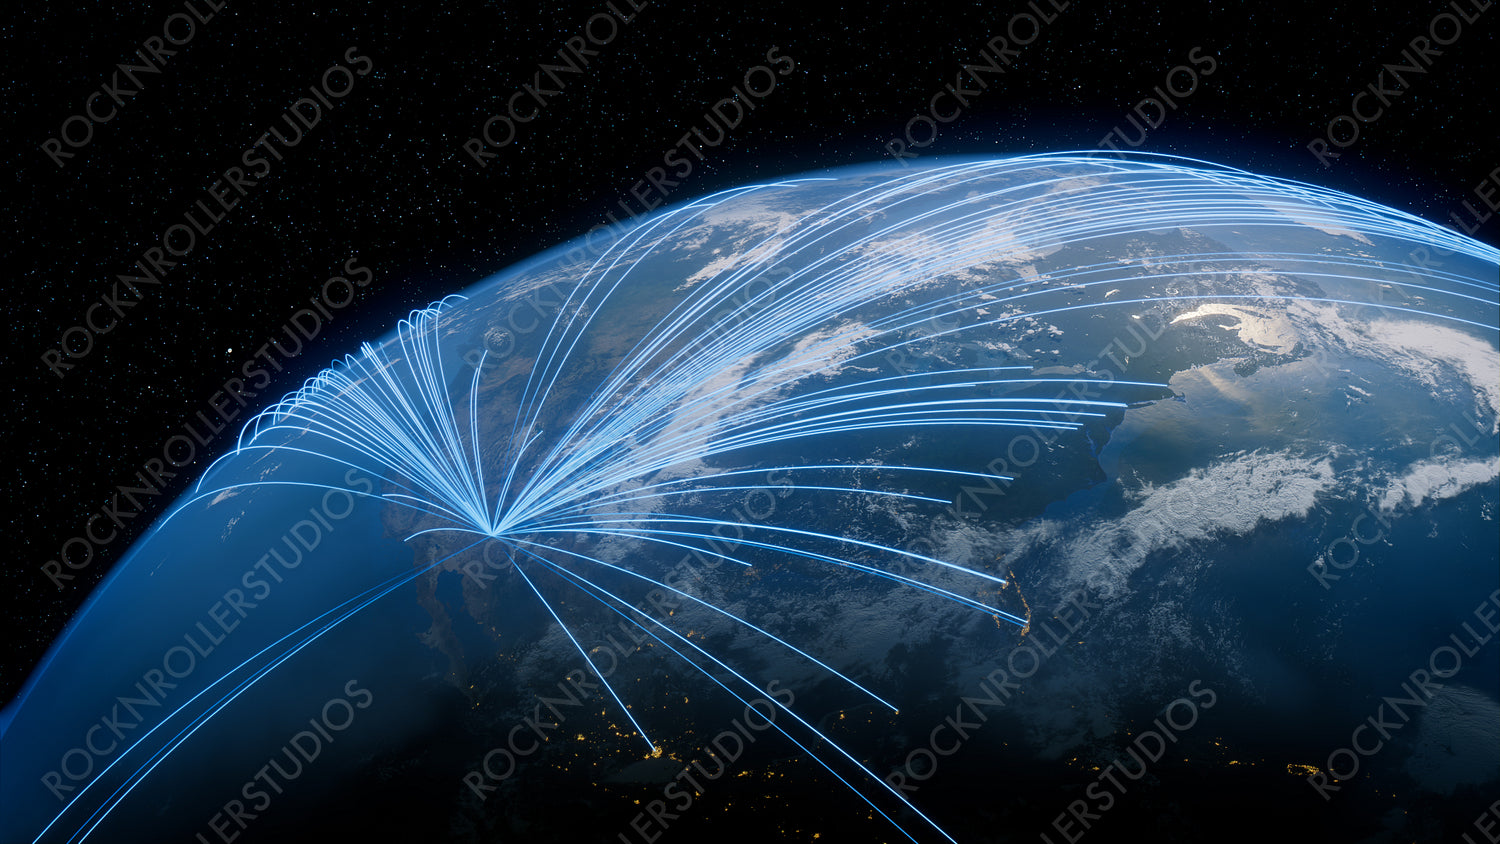 Earth in Space. Blue Lines connect Phoenix, USA with Cities across the World. Global Travel or Networking Concept.